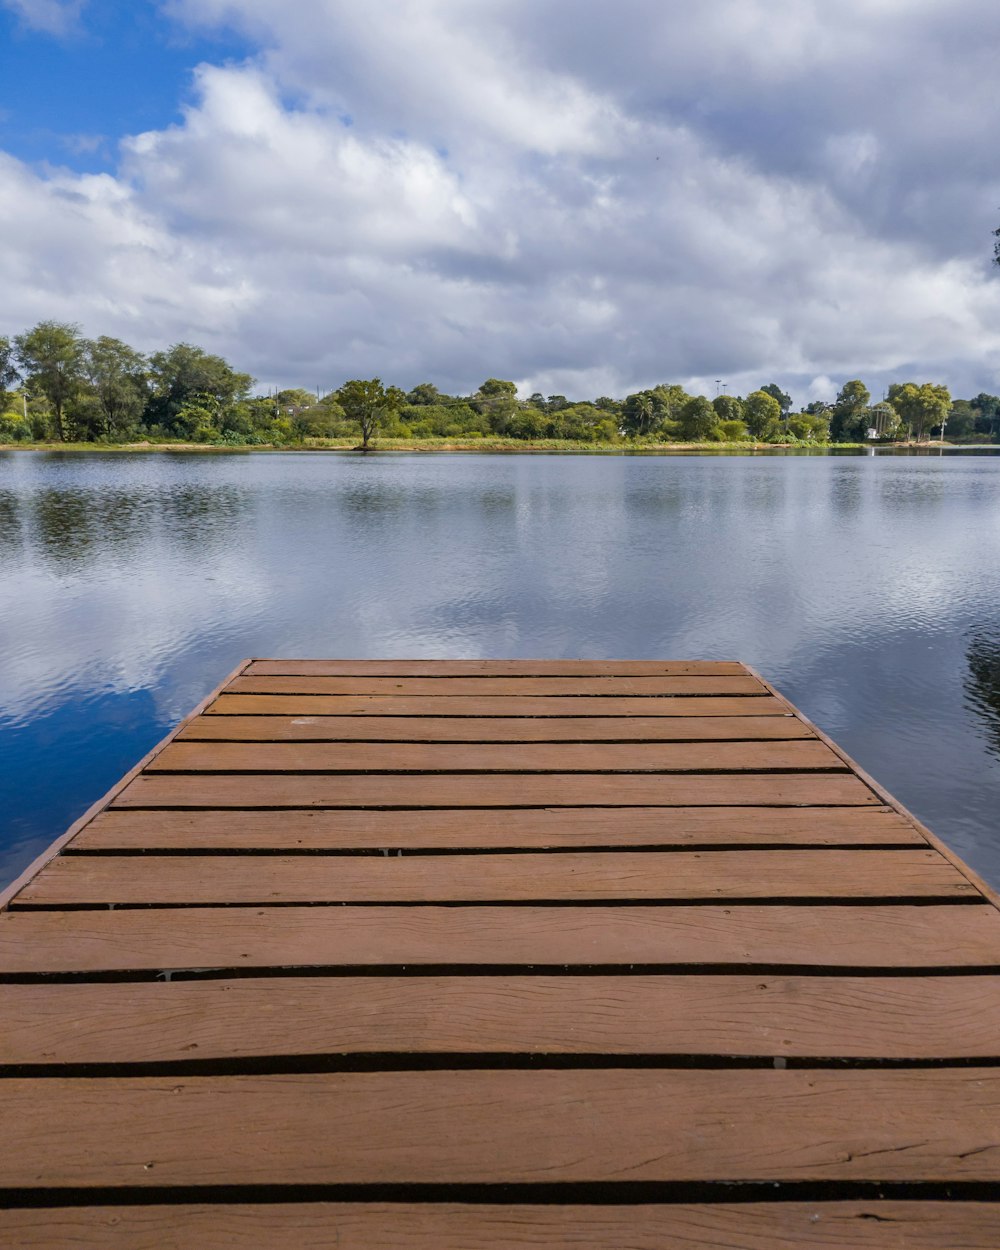 a wood dock over a body of water with trees in the background